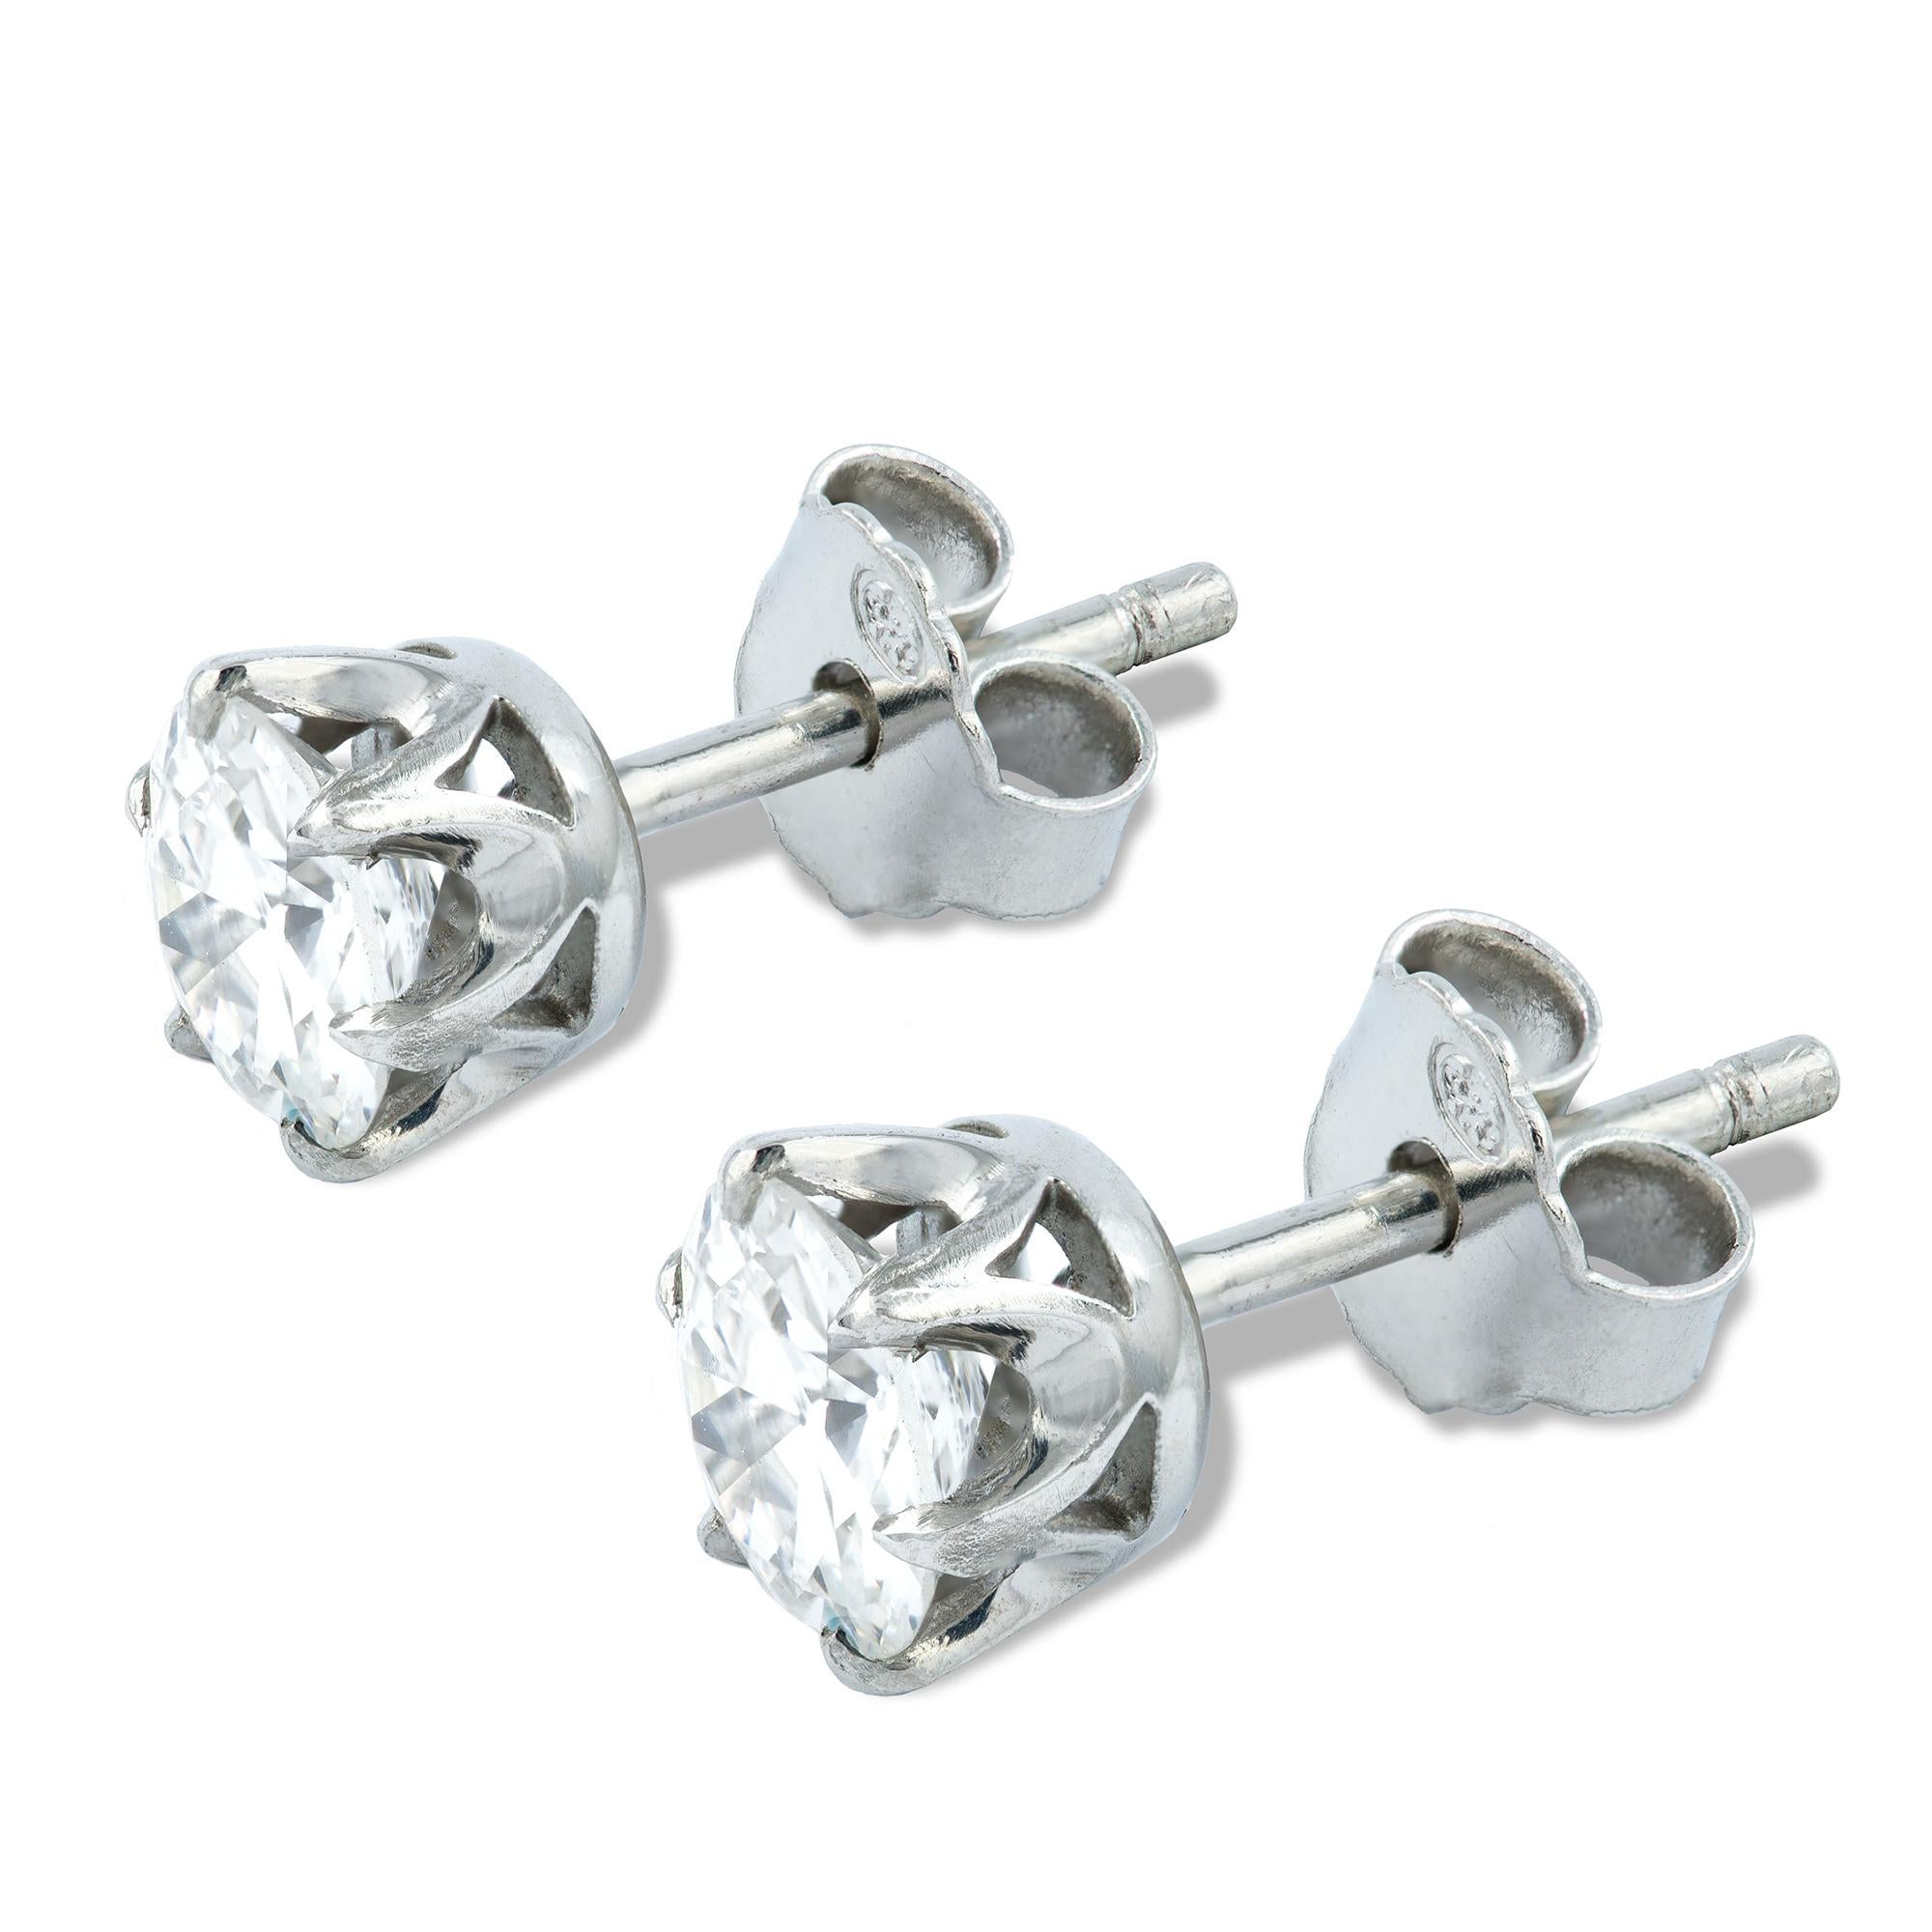 A pair of single stone diamond stud earrings, the round brilliant-cut diamonds weighing 0.73 and 0.74 carats, each set to a platinum rex-collet to a peg and C-scroll fitting, hallmarked platinum, London 2017, made by Bentley & Skinner, measuring